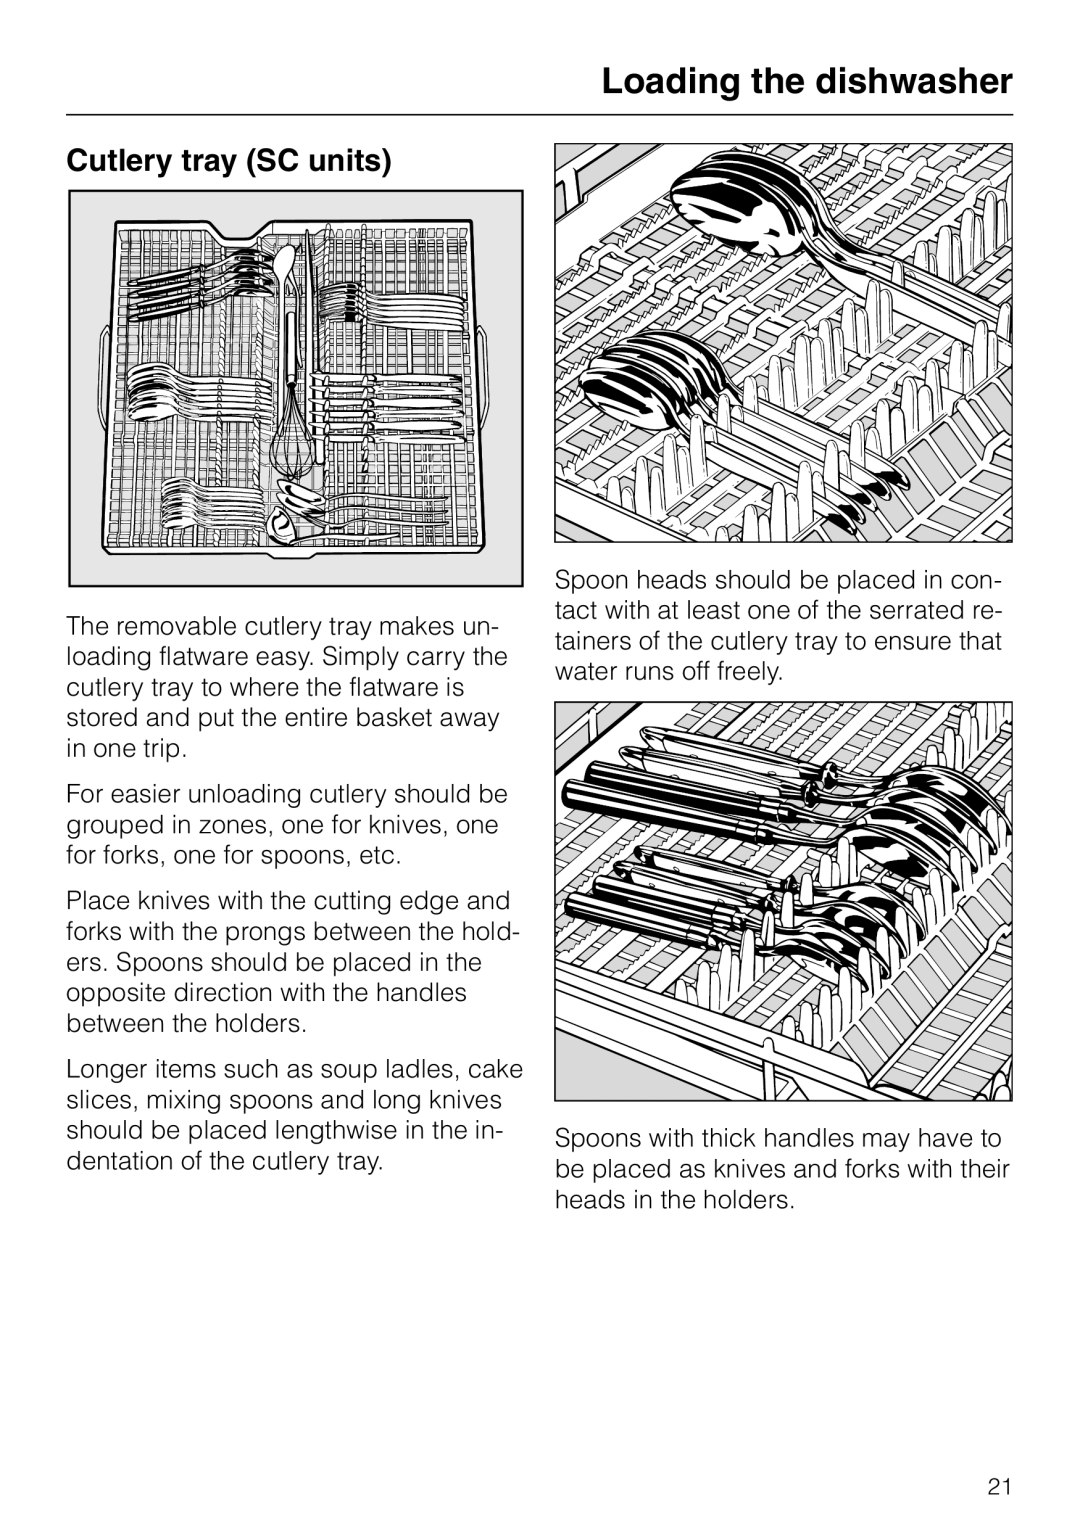 Miele G 663 PLUS, G 863 PLUS operating instructions Cutlery tray SC units, Loading the dishwasher 